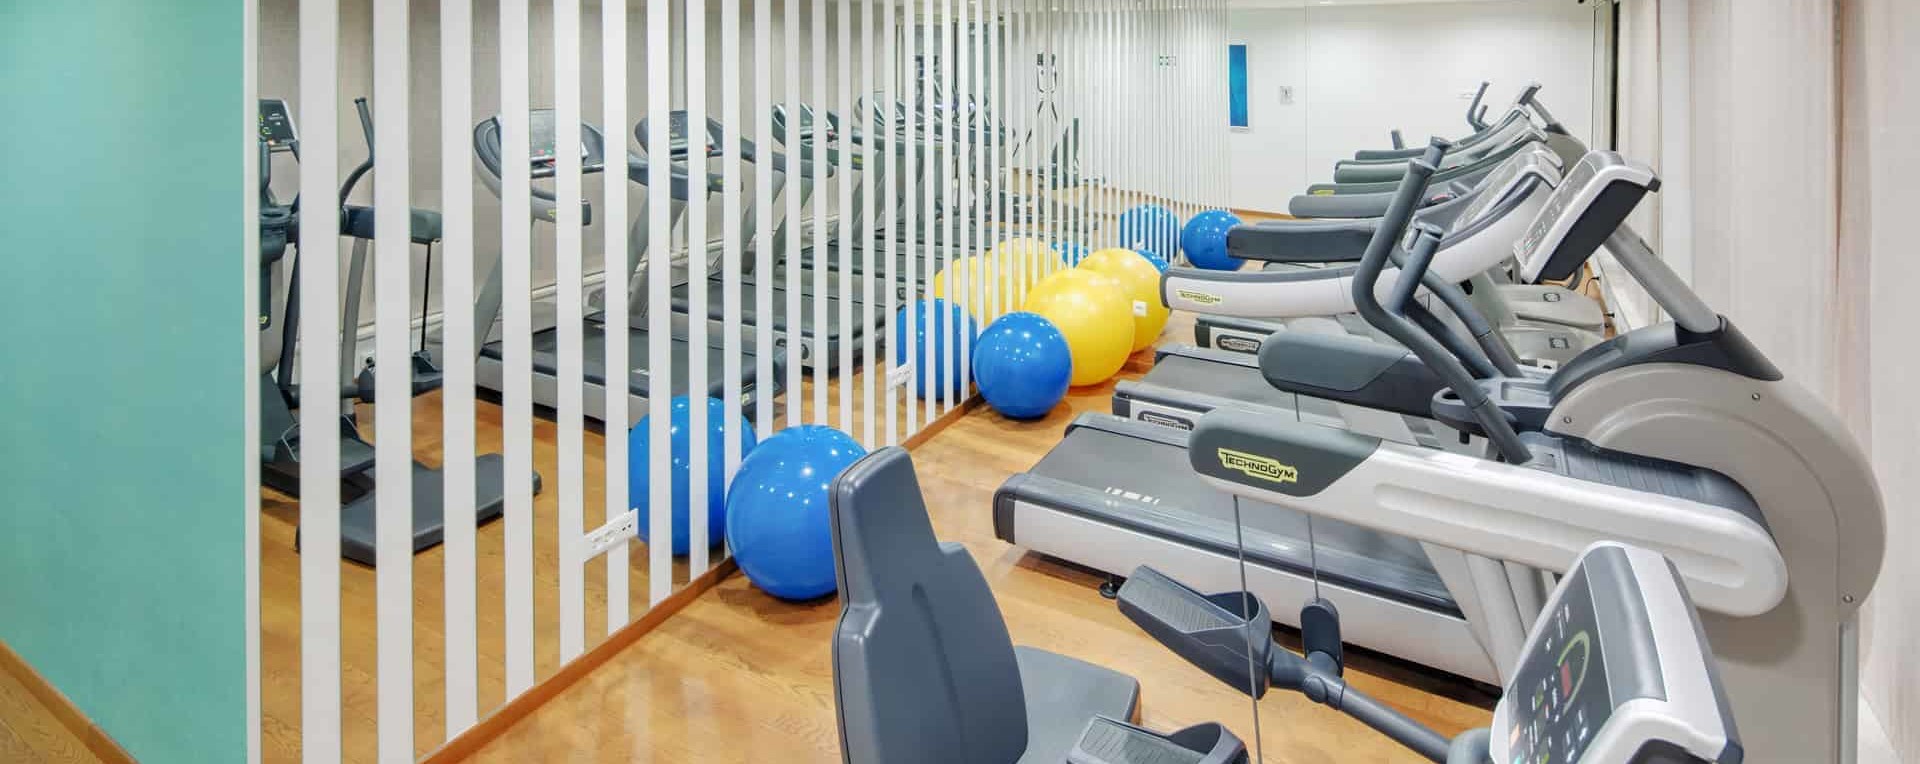 Hotel gym in Dioklecijan Hotel & Residence Split Croatia, working out on vacation, treadmill, exercise bike and pilates ball